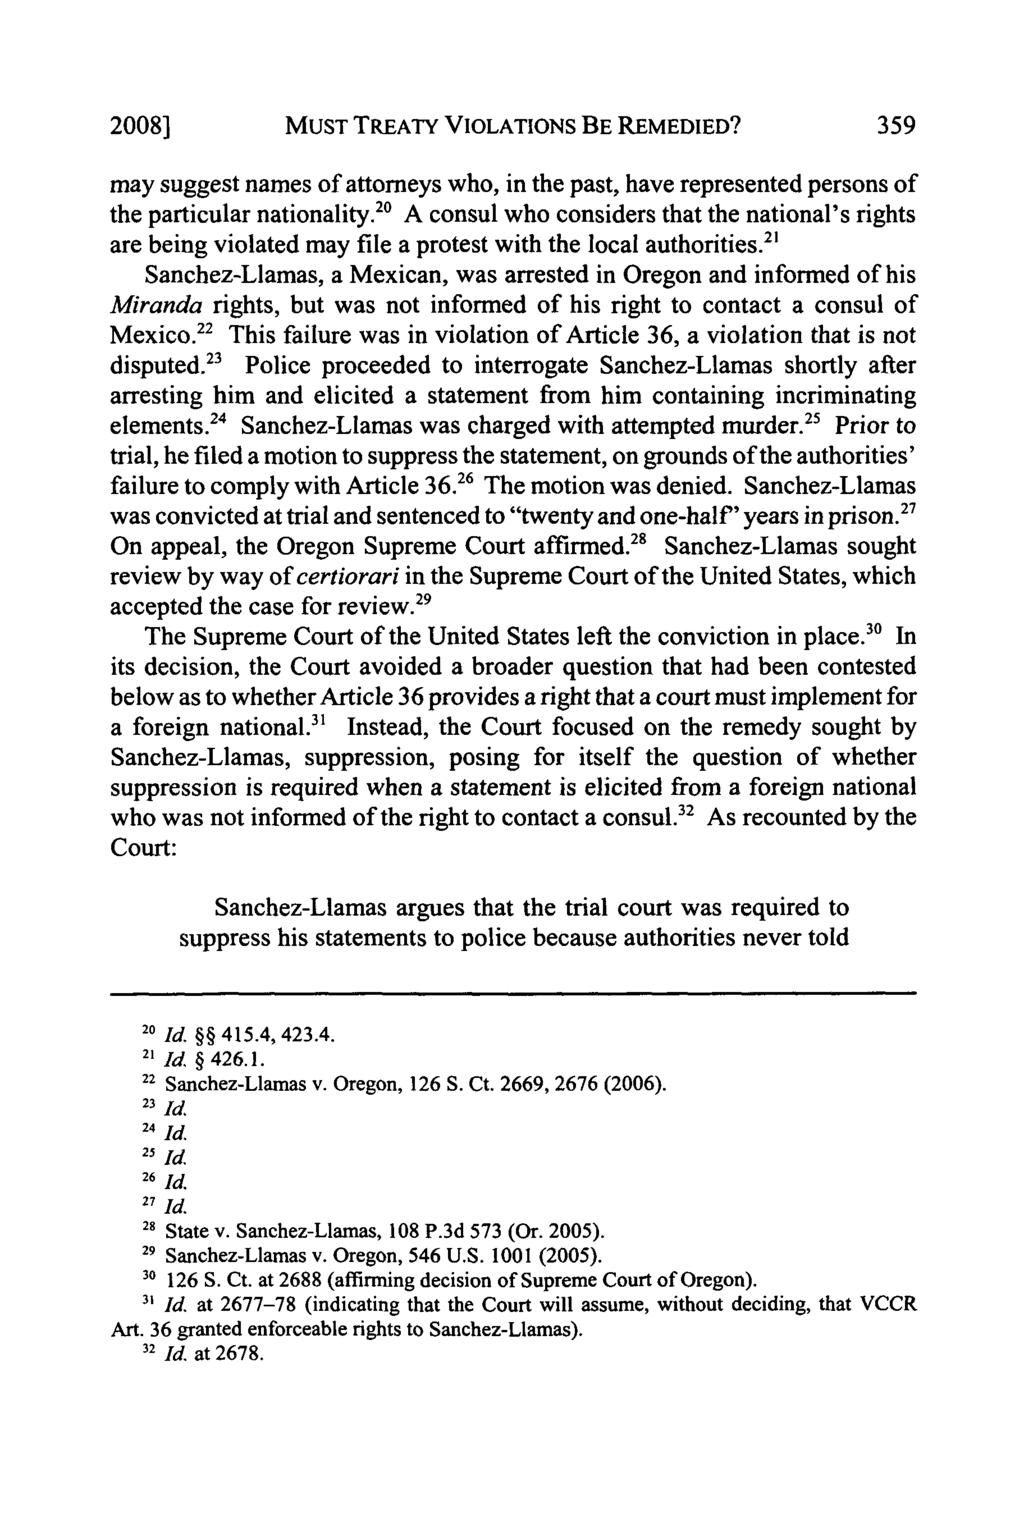 2008] MUST TREATY VIOLATIONS BE REMEDIED? may suggest names of attorneys who, in the past, have represented persons of the particular nationality.